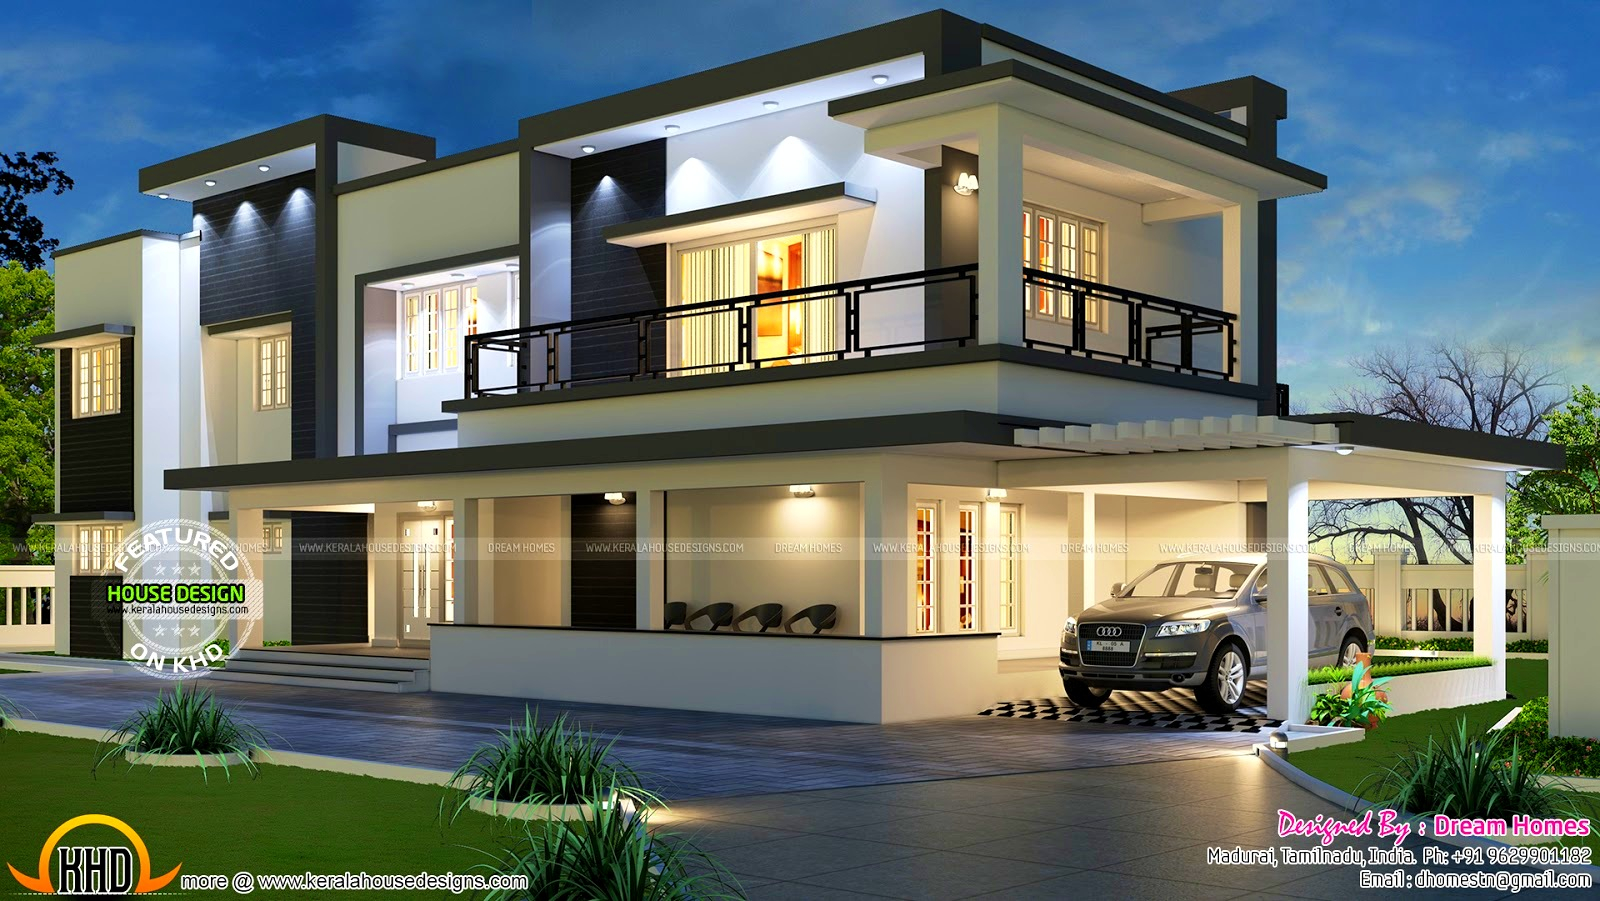 modern house designs modern house plans new design architecture ideas small designs ultra with AFLMNCZ